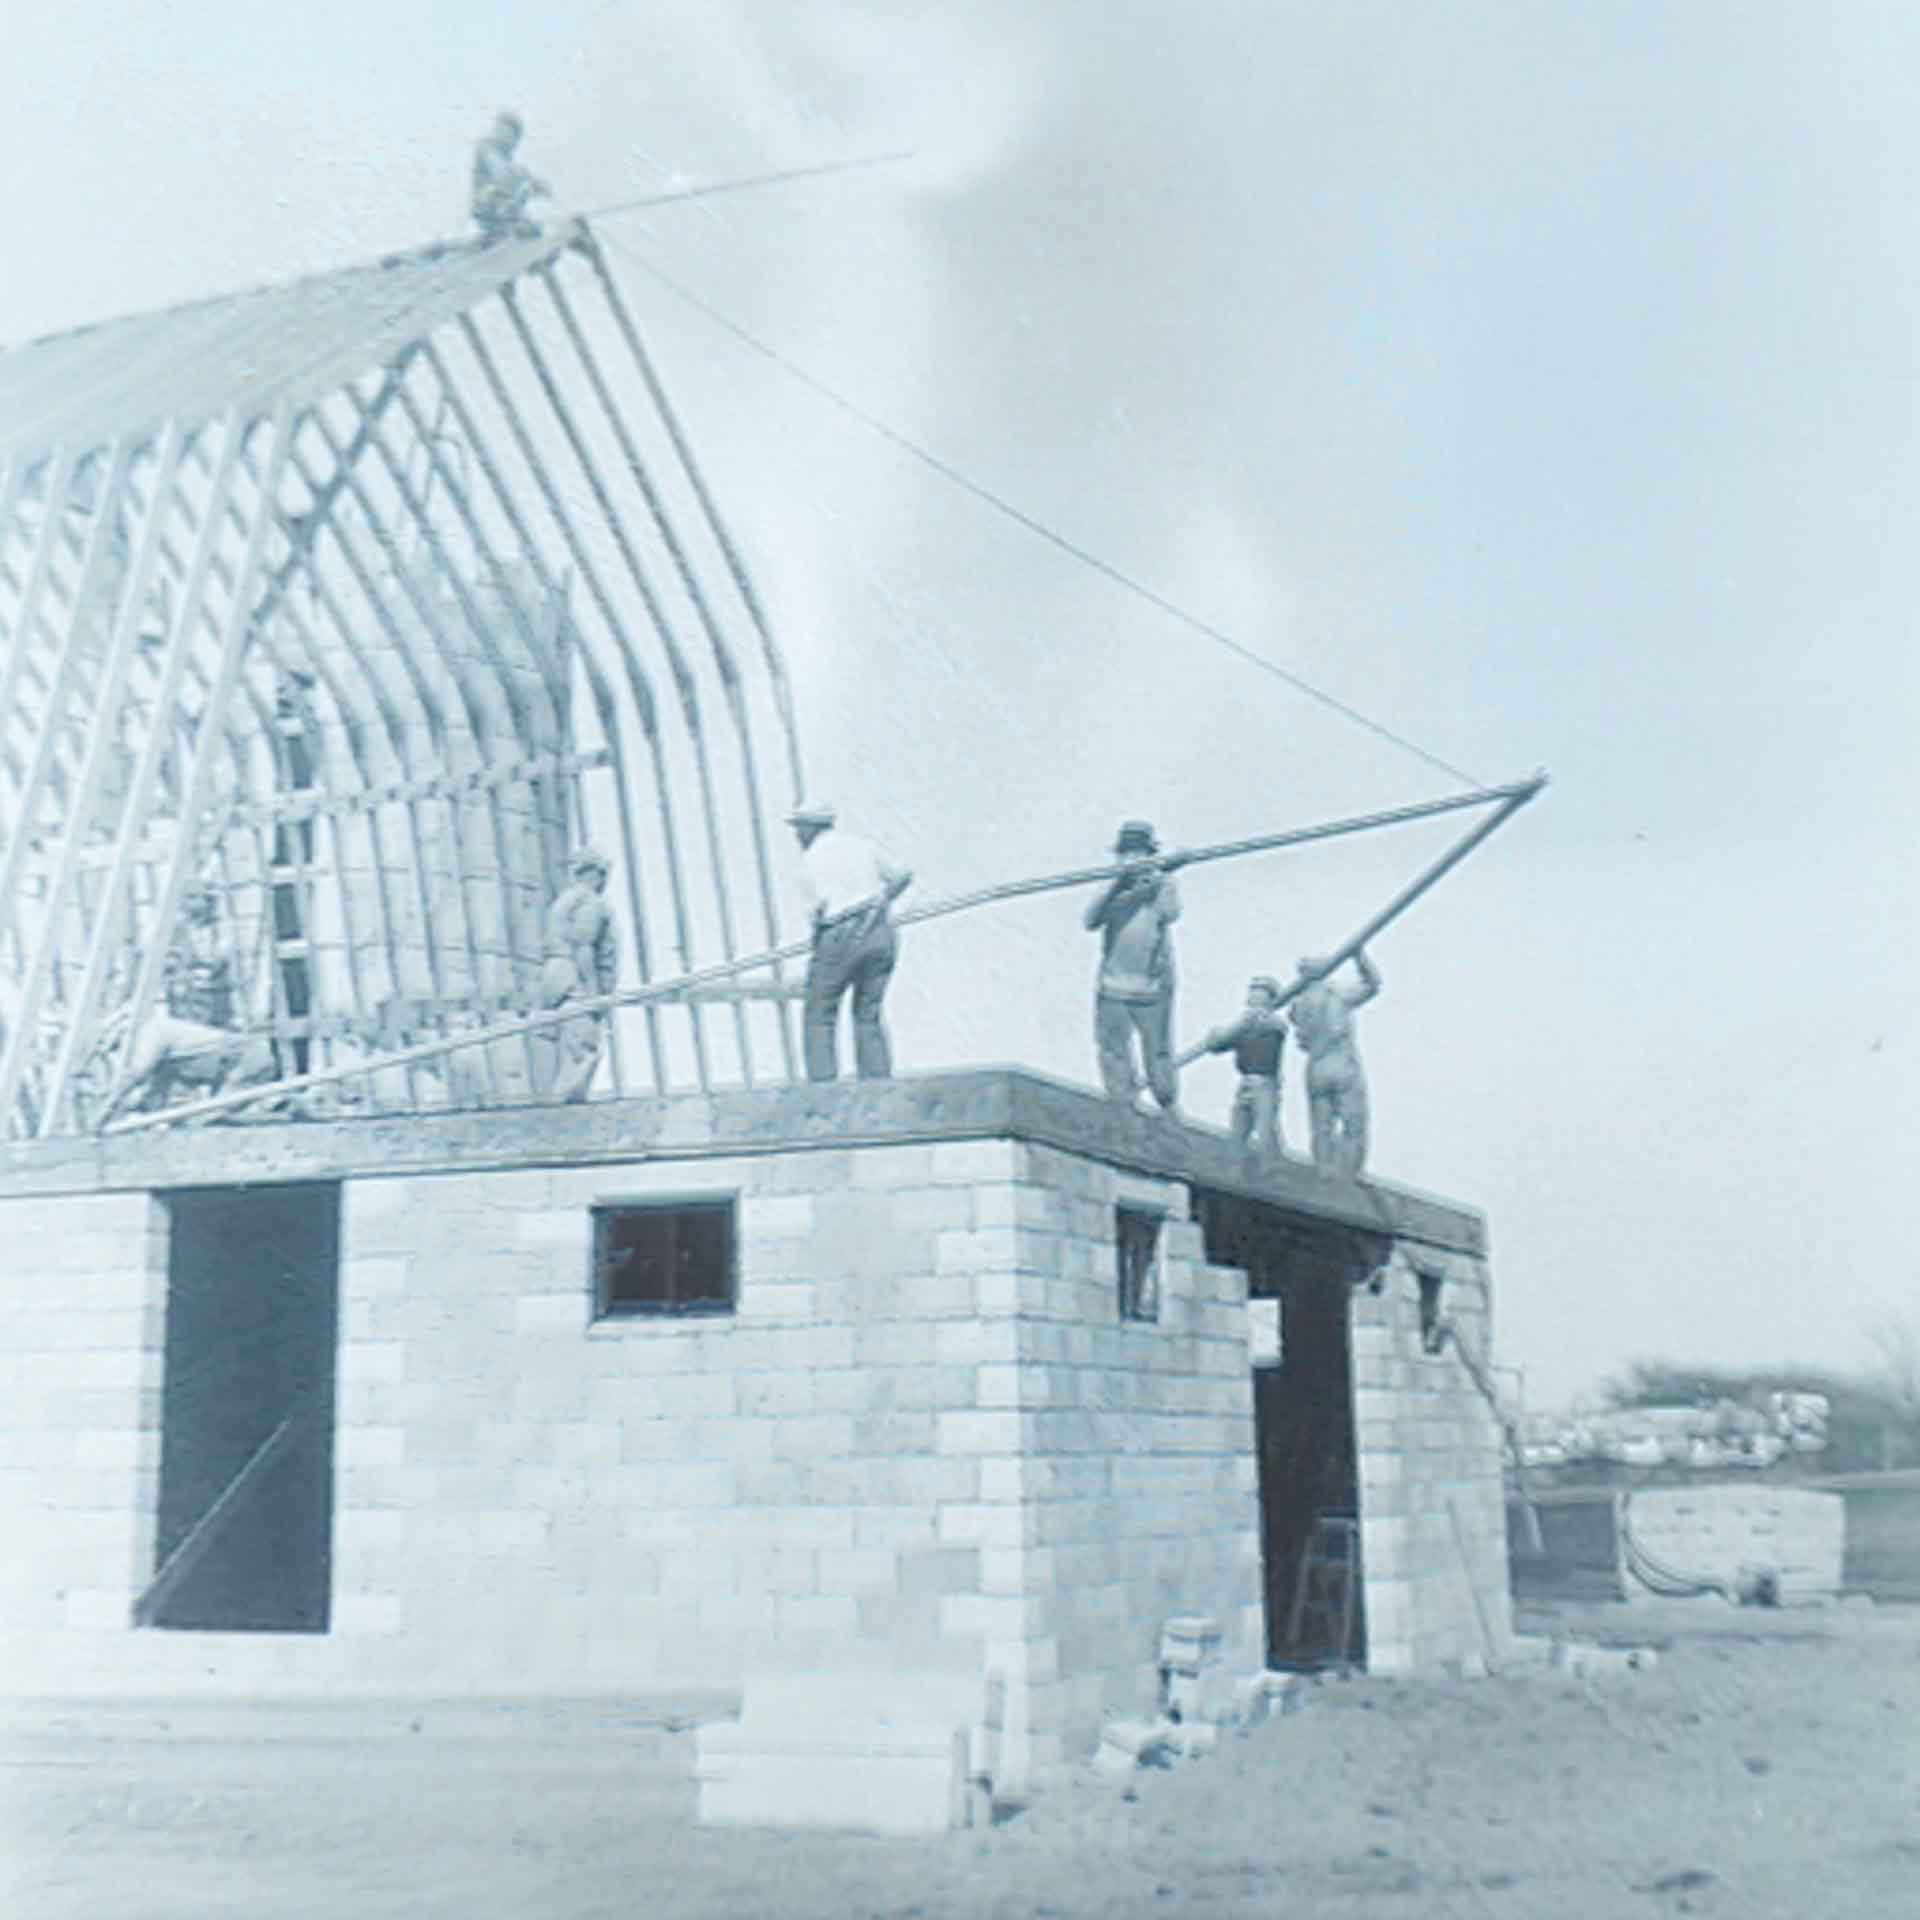 Cooks Farm Dairy Rebuilding Barn after fire 1950's